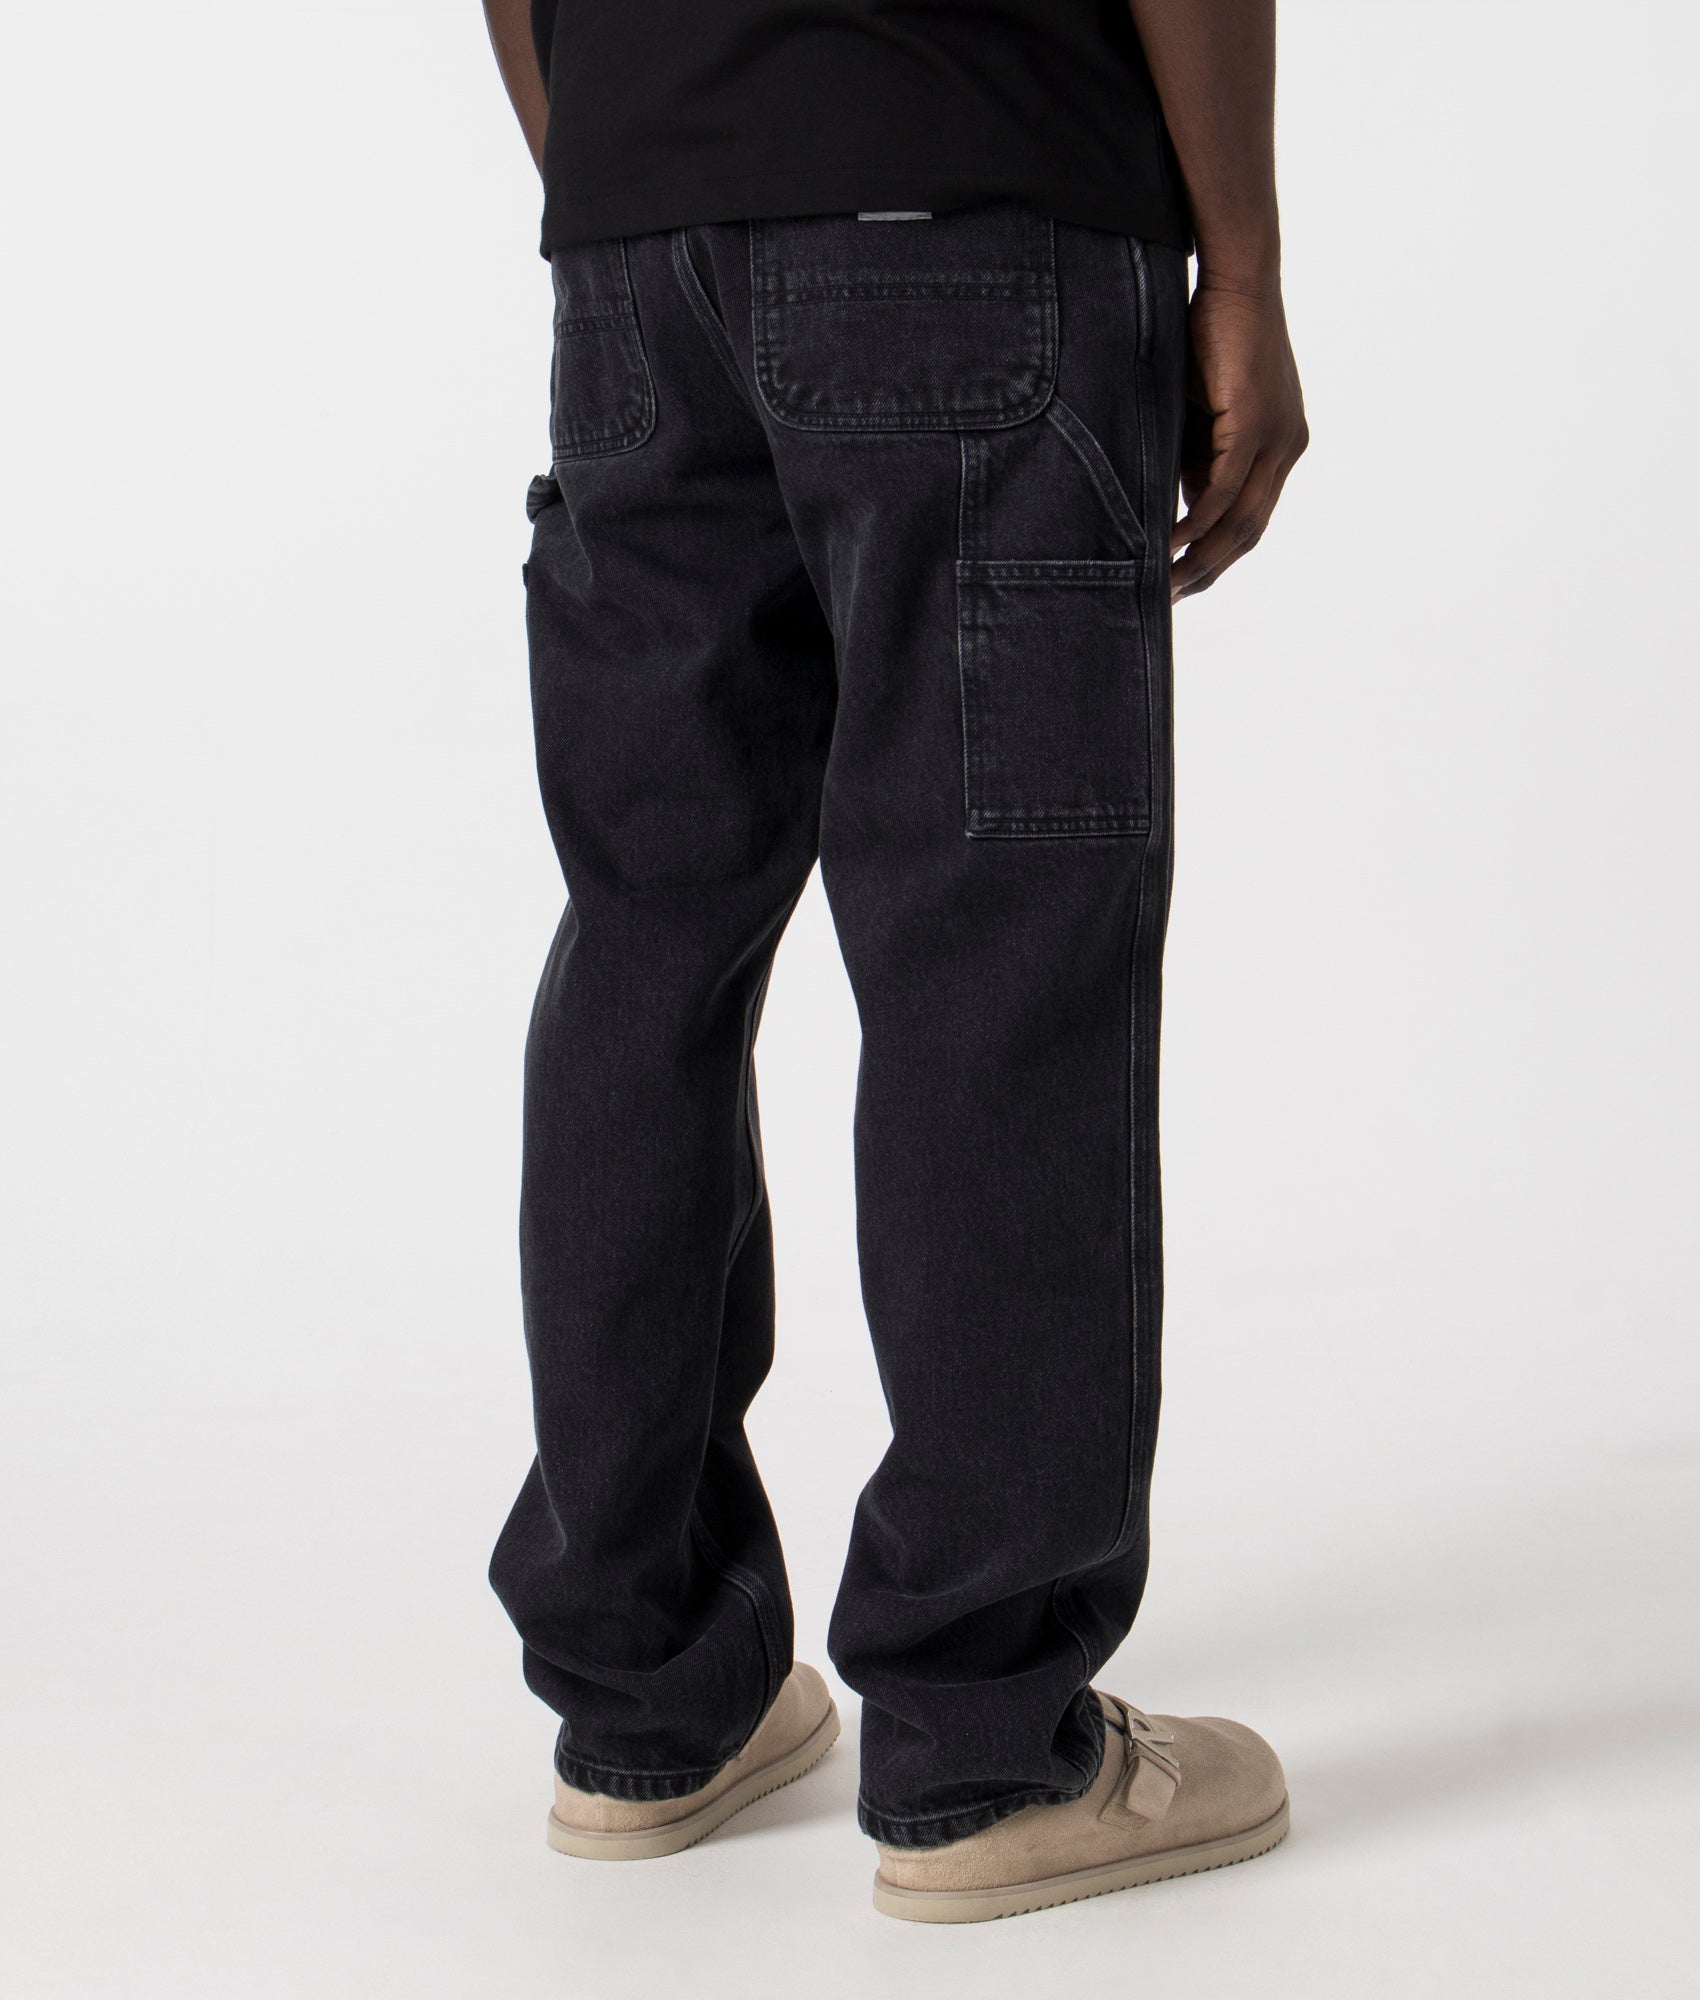 Carhartt WIP Mens Relaxed Fit Single Knee Pants - Colour: 8906 Black Stonewashed - Size: 32R